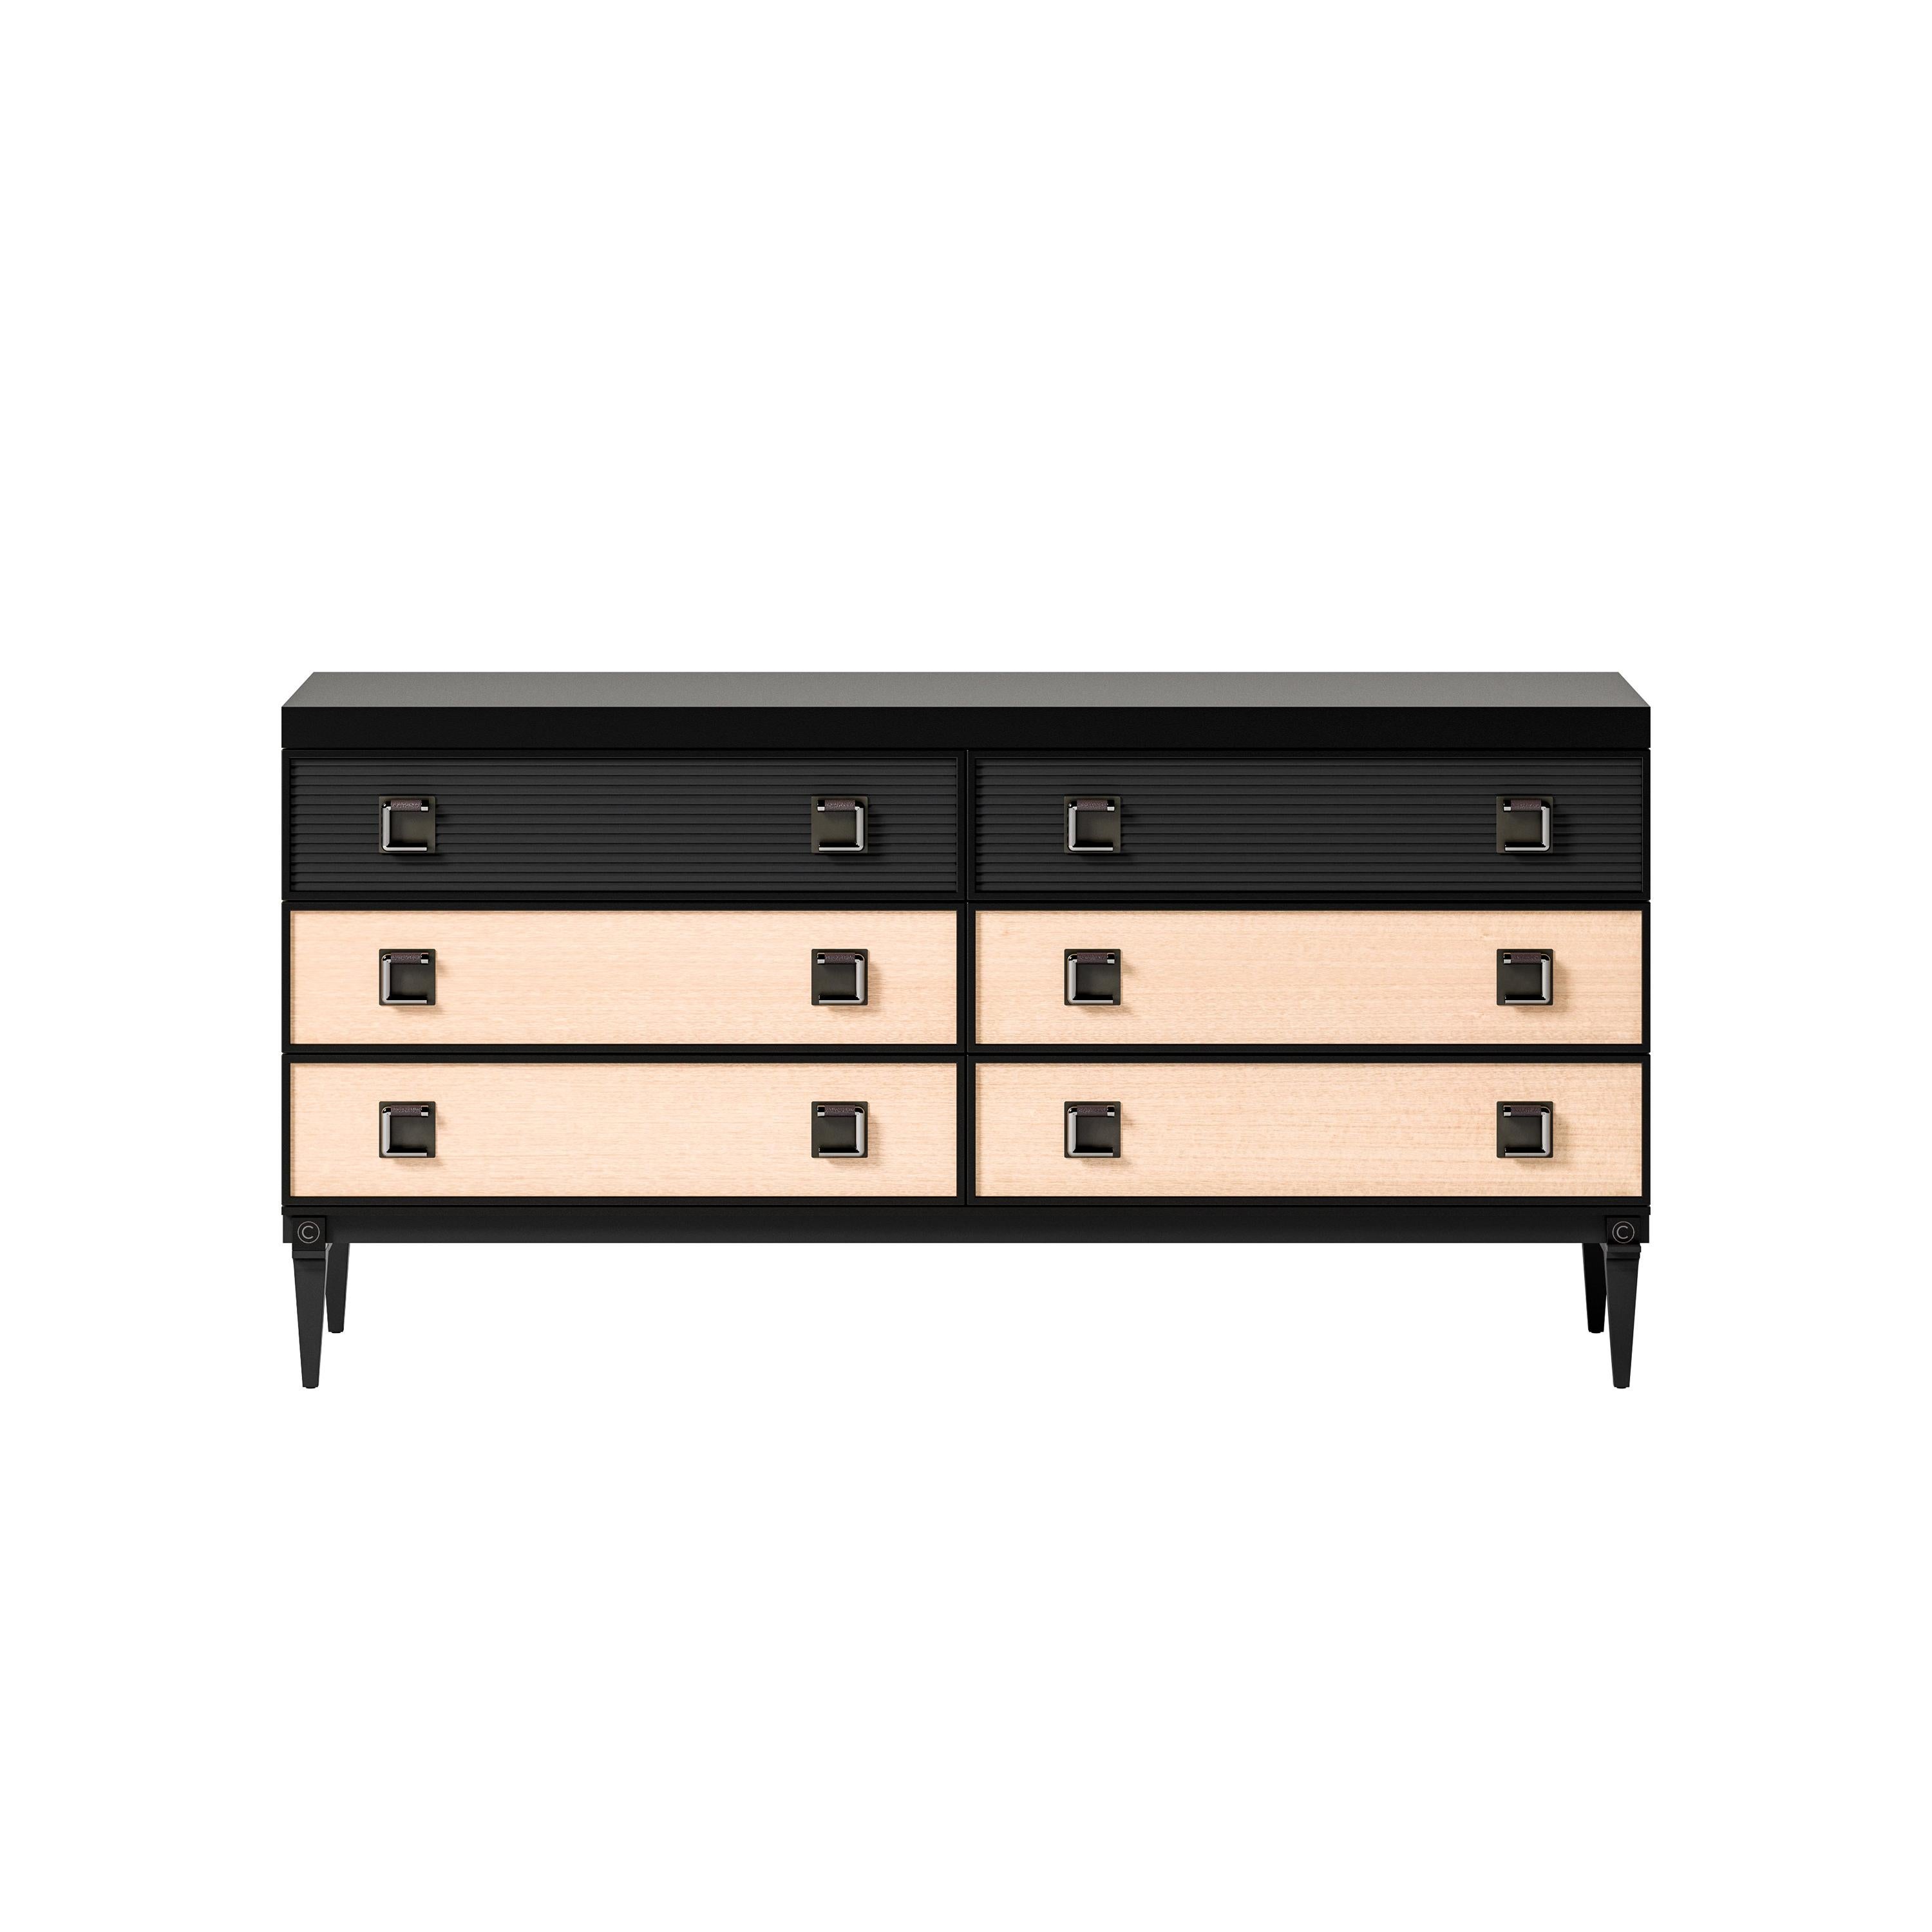 S511 Sesto Senso Low Chest of Drawers For Sale